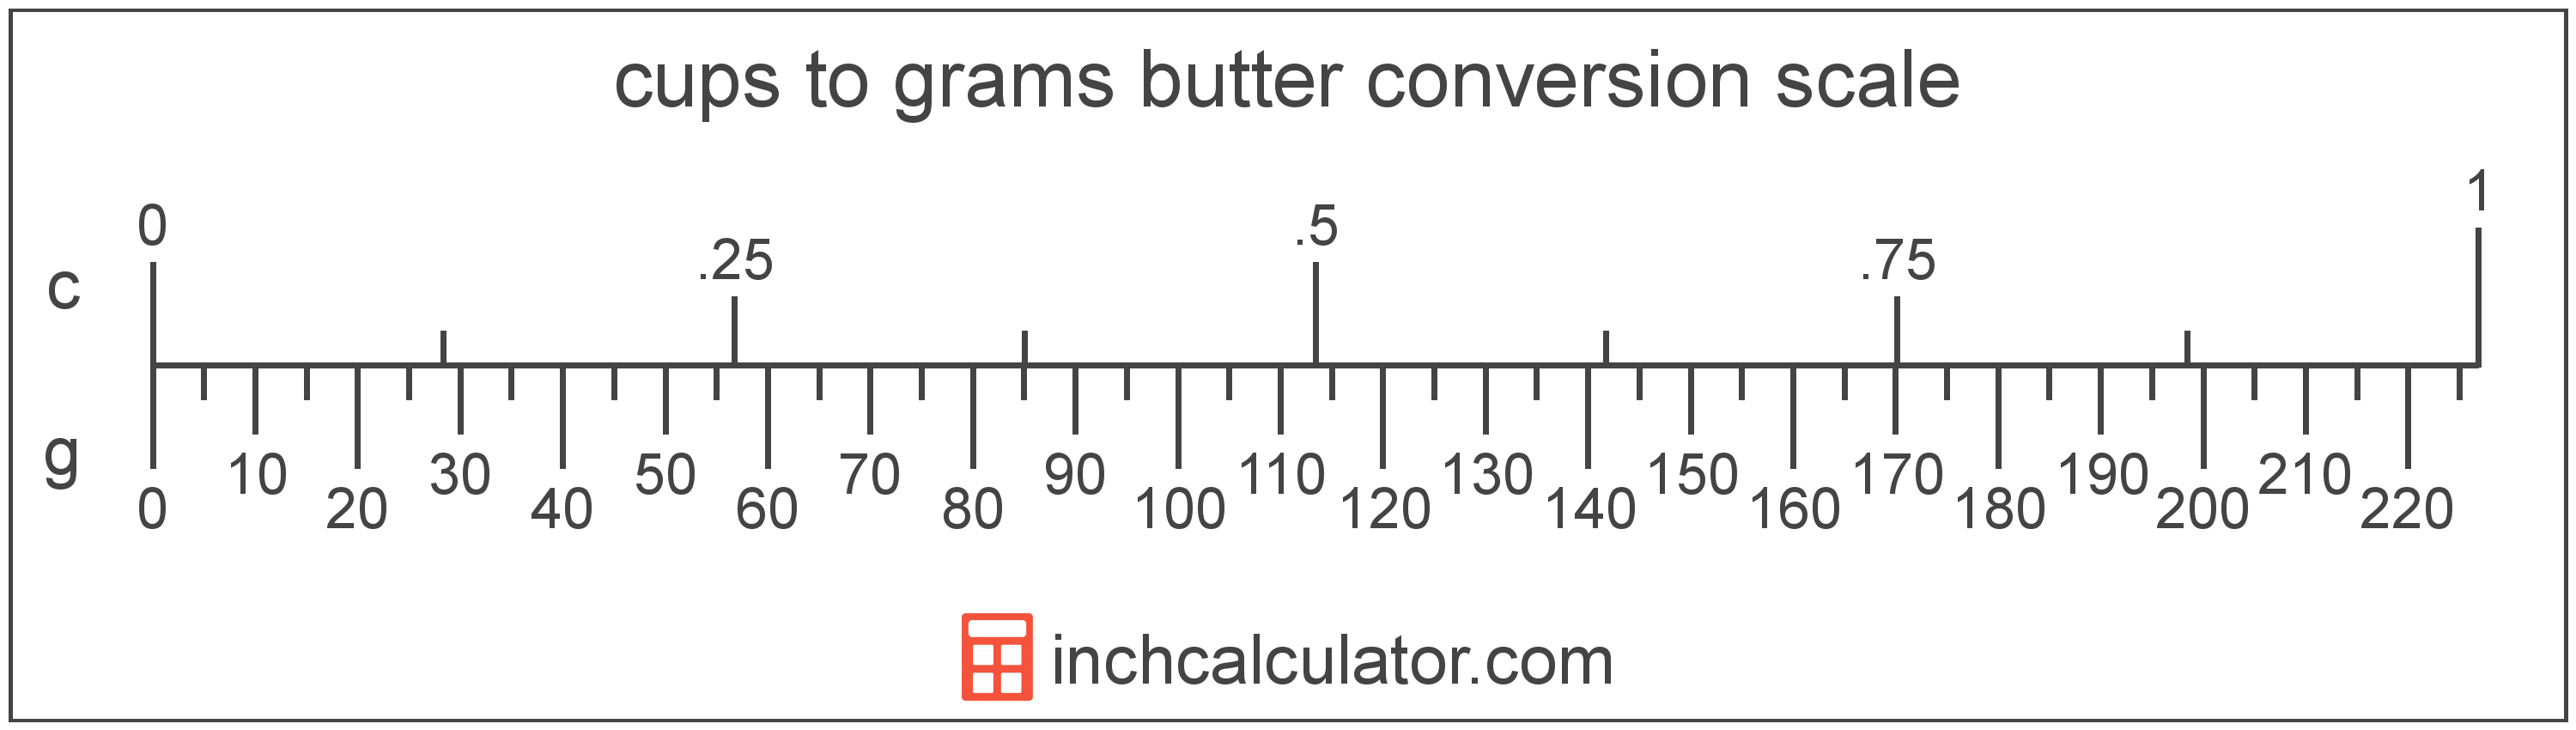 How to Convert Grams to Cups?